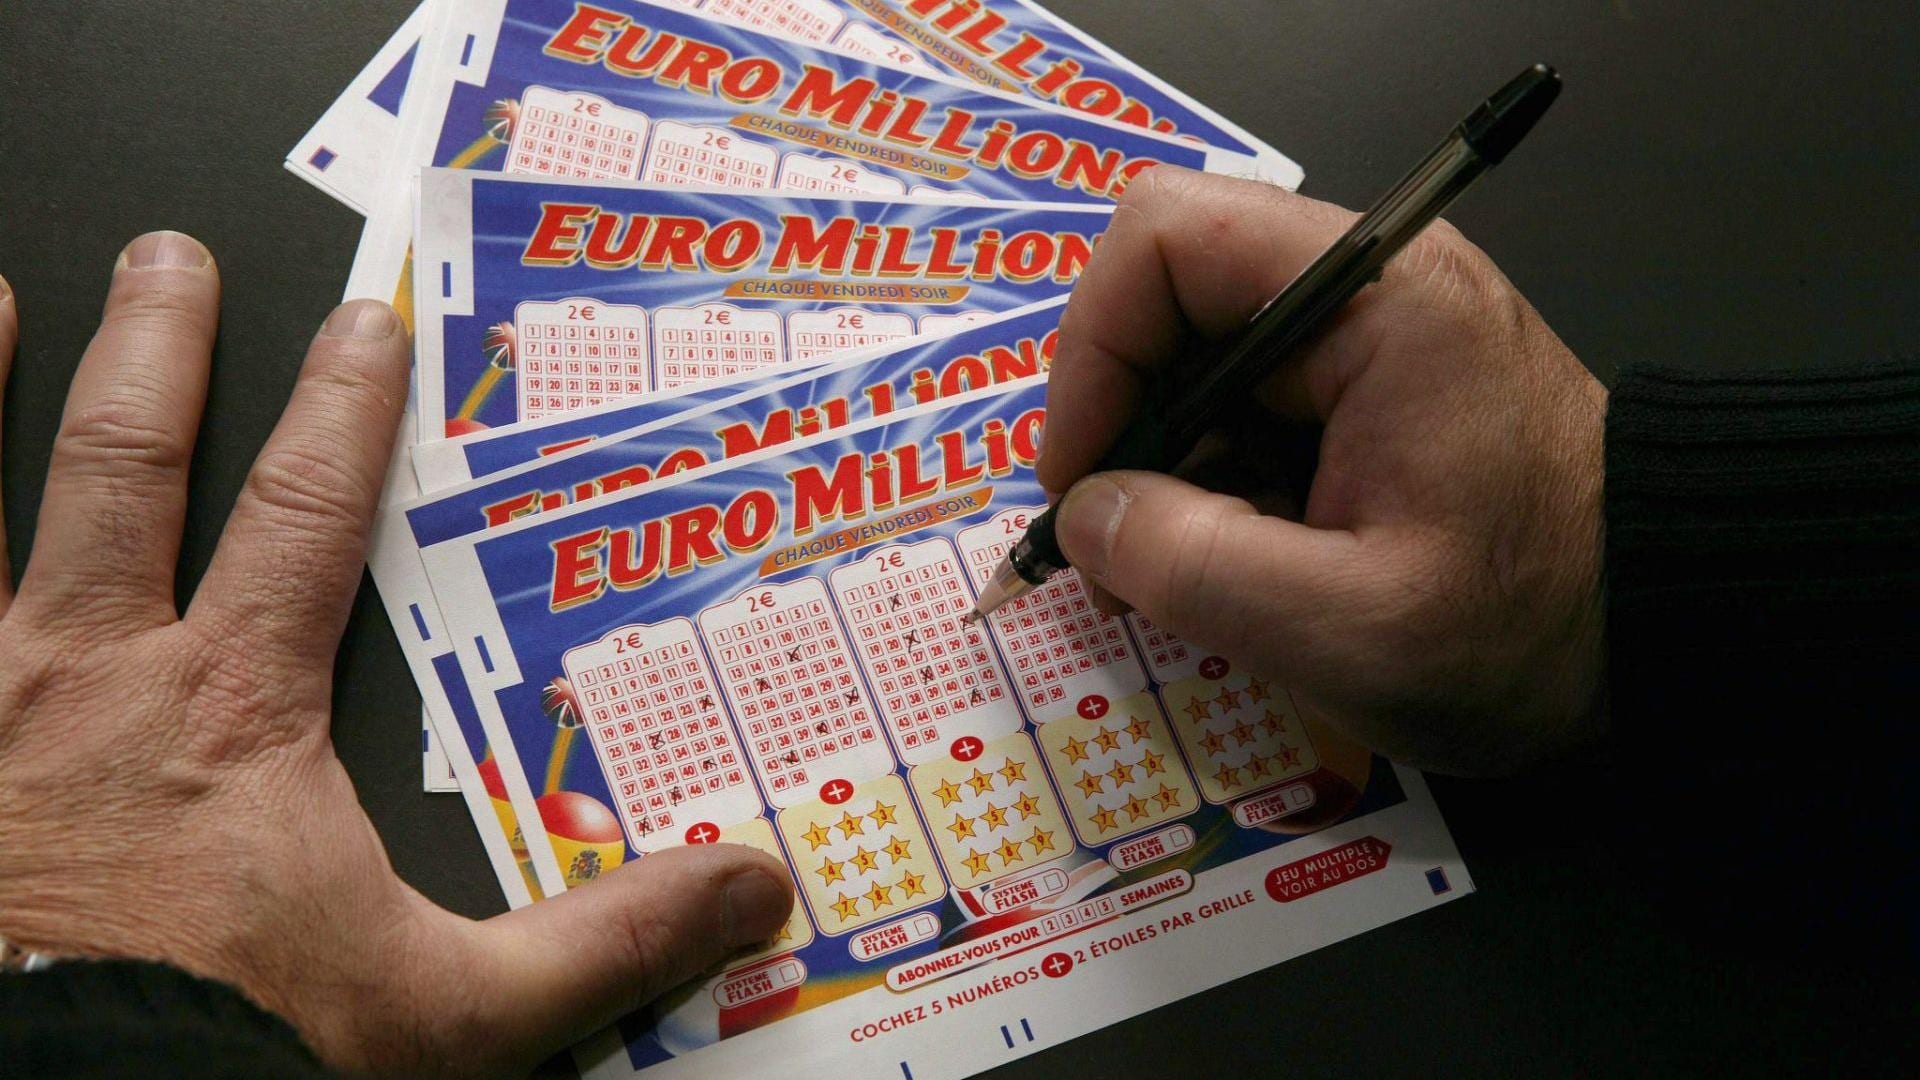 EUROMILLIONS TODAY Friday: Winning numbers | EuroMillions will award a prize of €28,649,442 to one player this Friday.